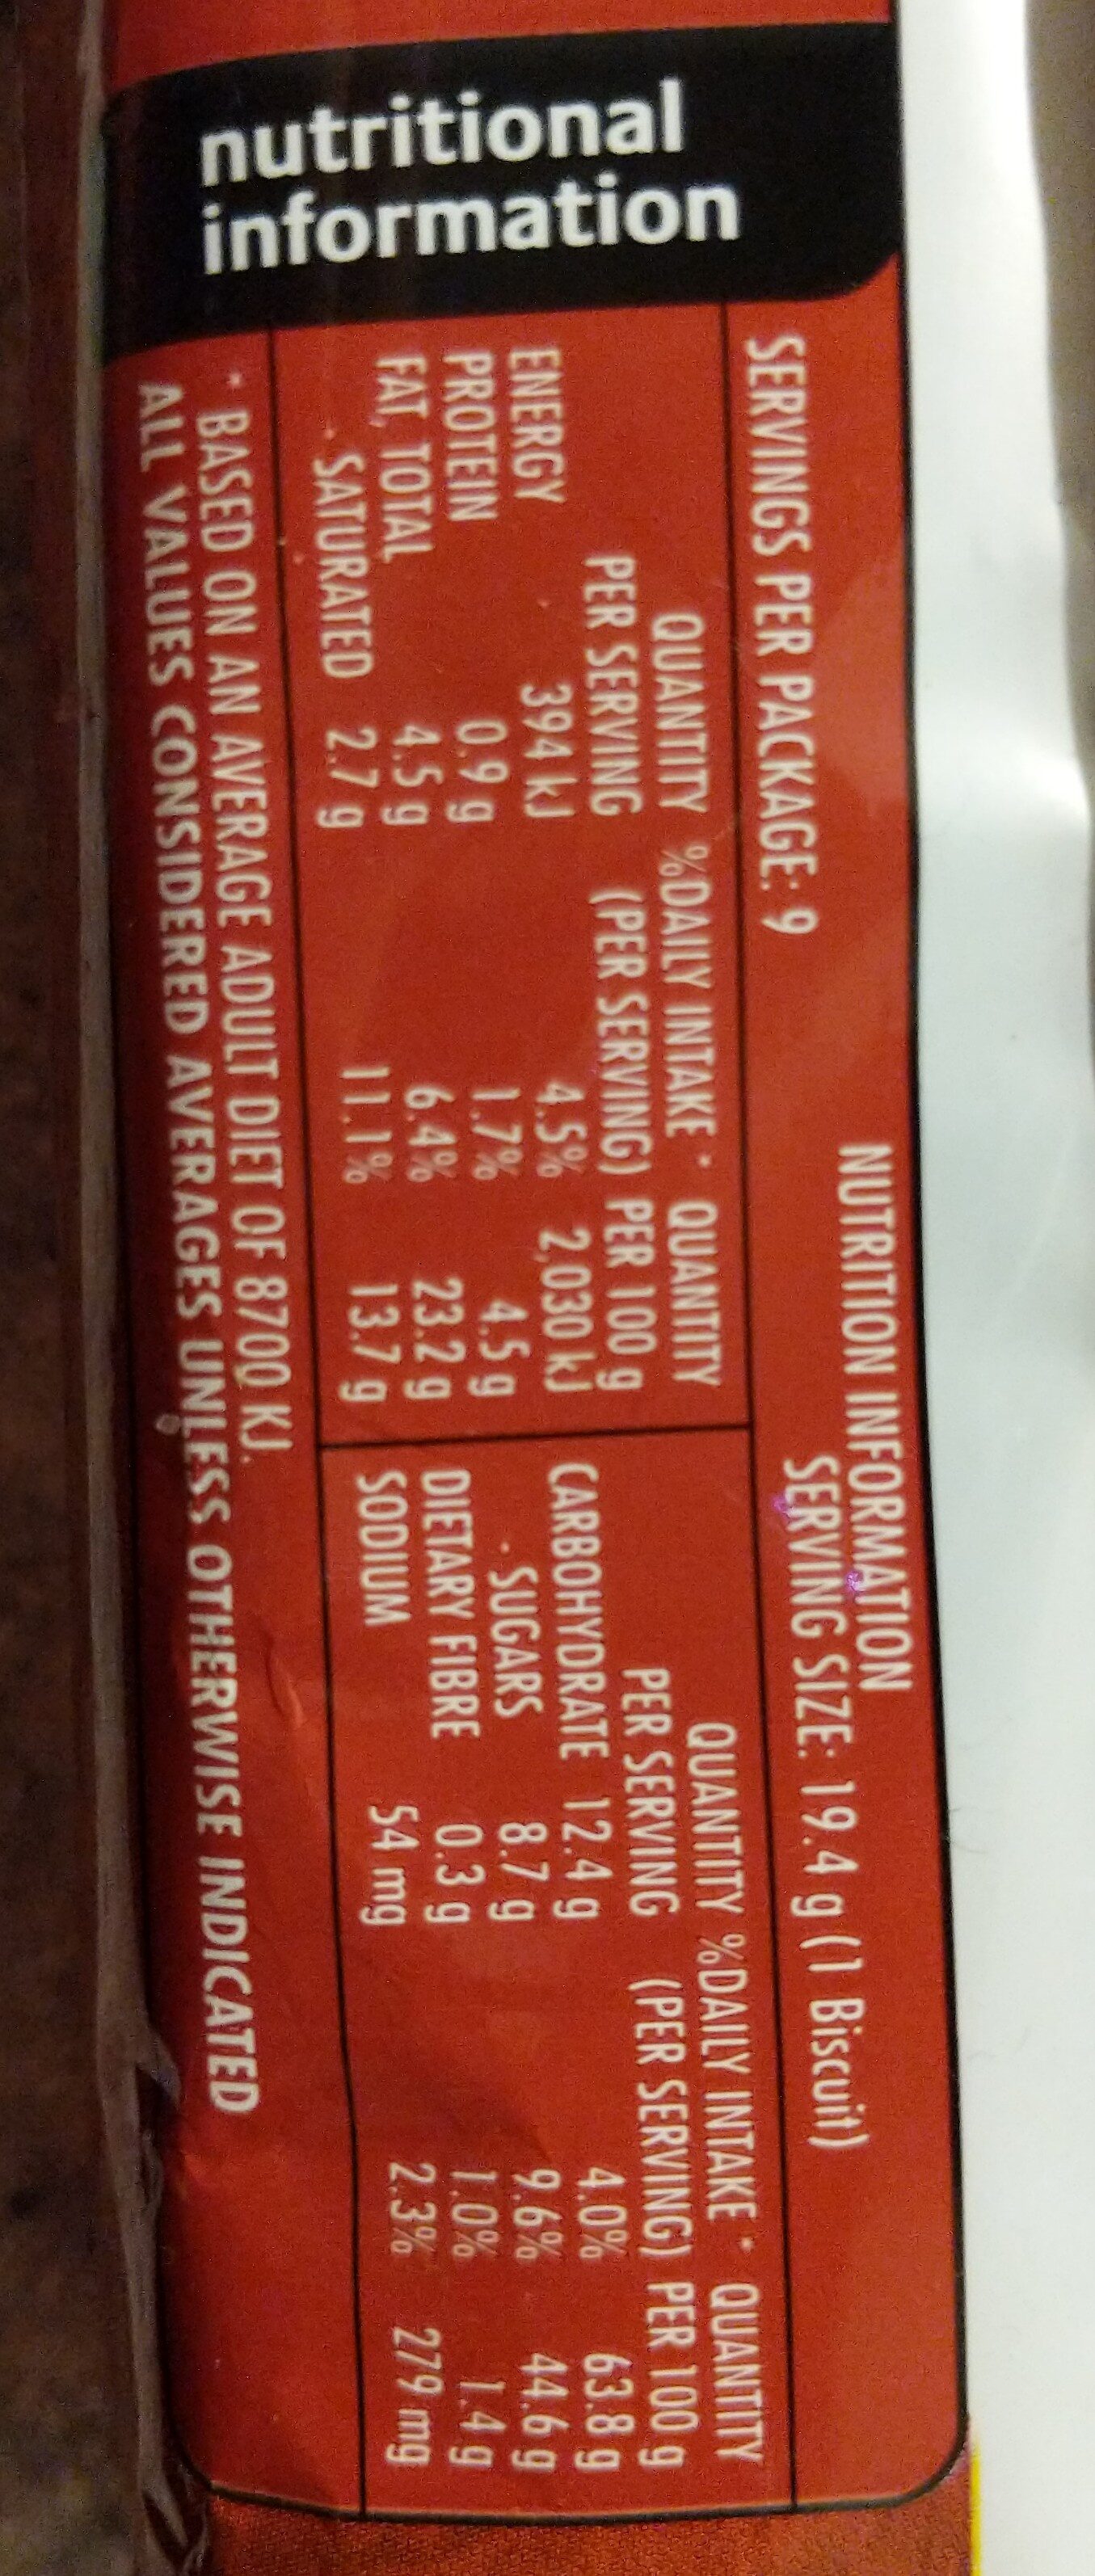 Tim Tam Murray River Salted Caramel - Nutrition facts